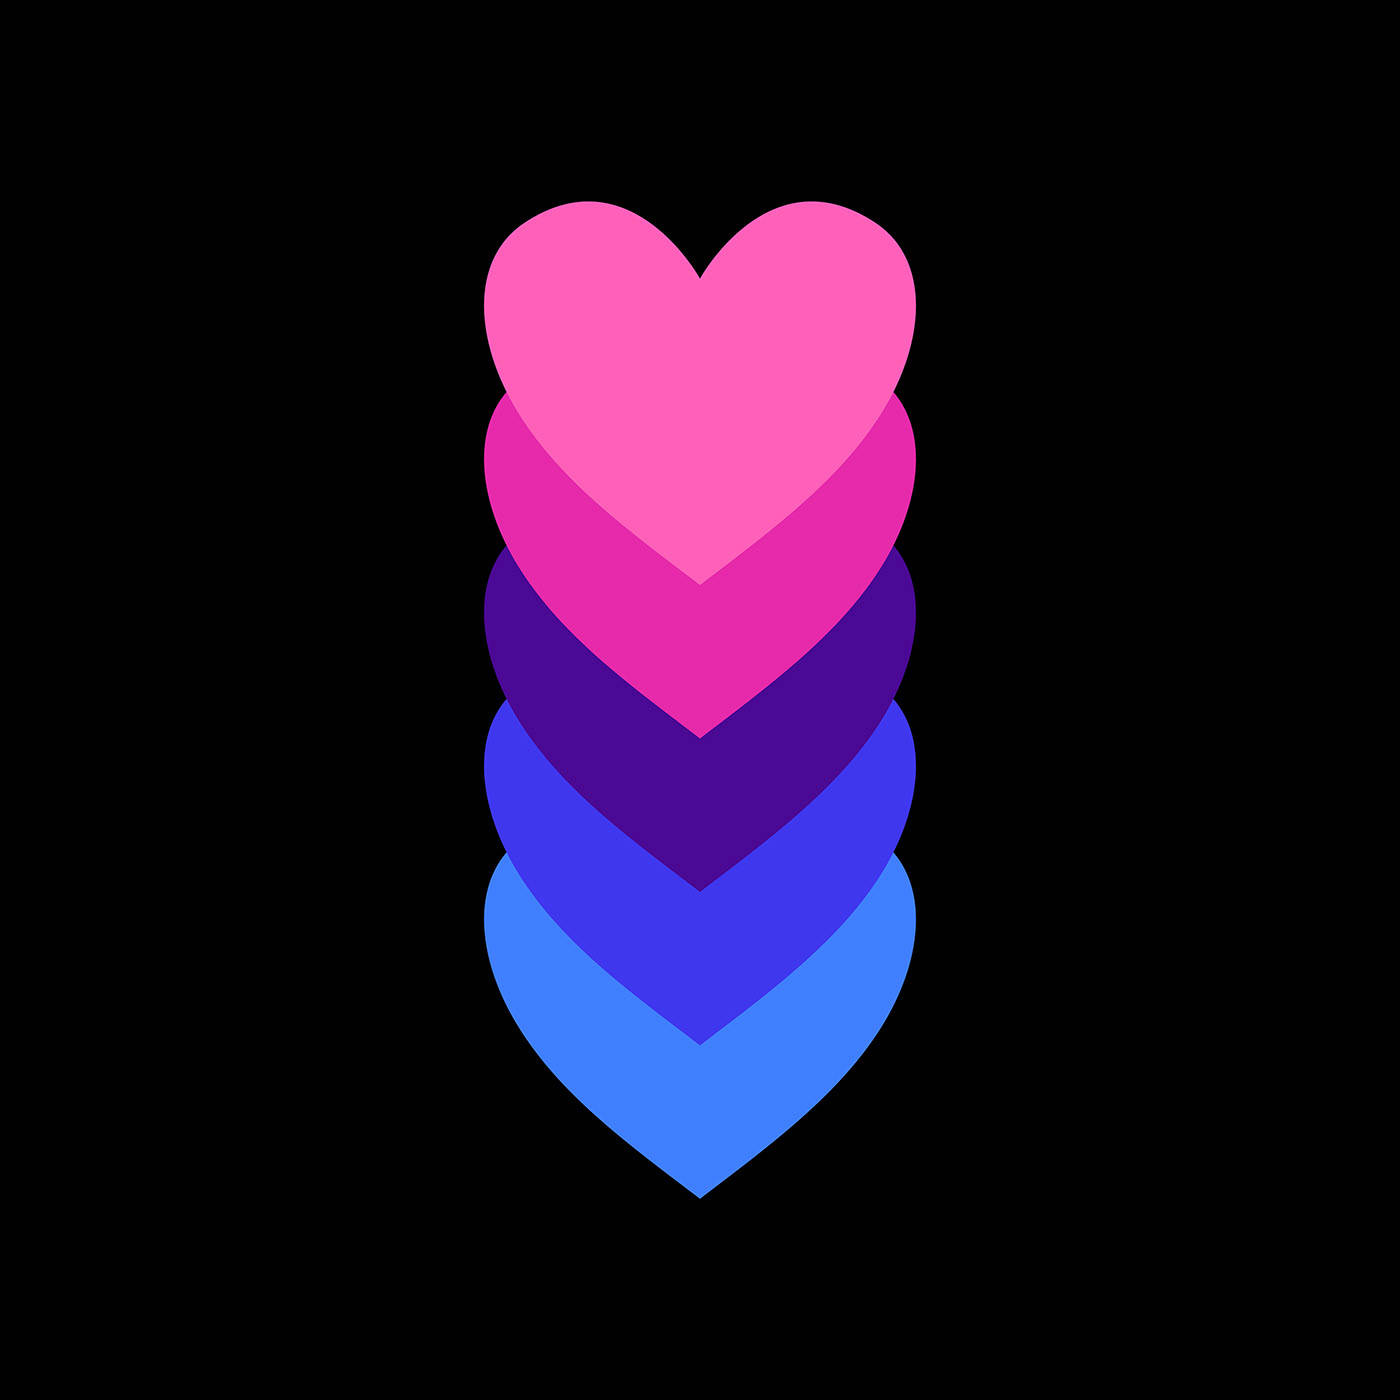 Omnisexual Pastel-colored Hearts Wallpaper